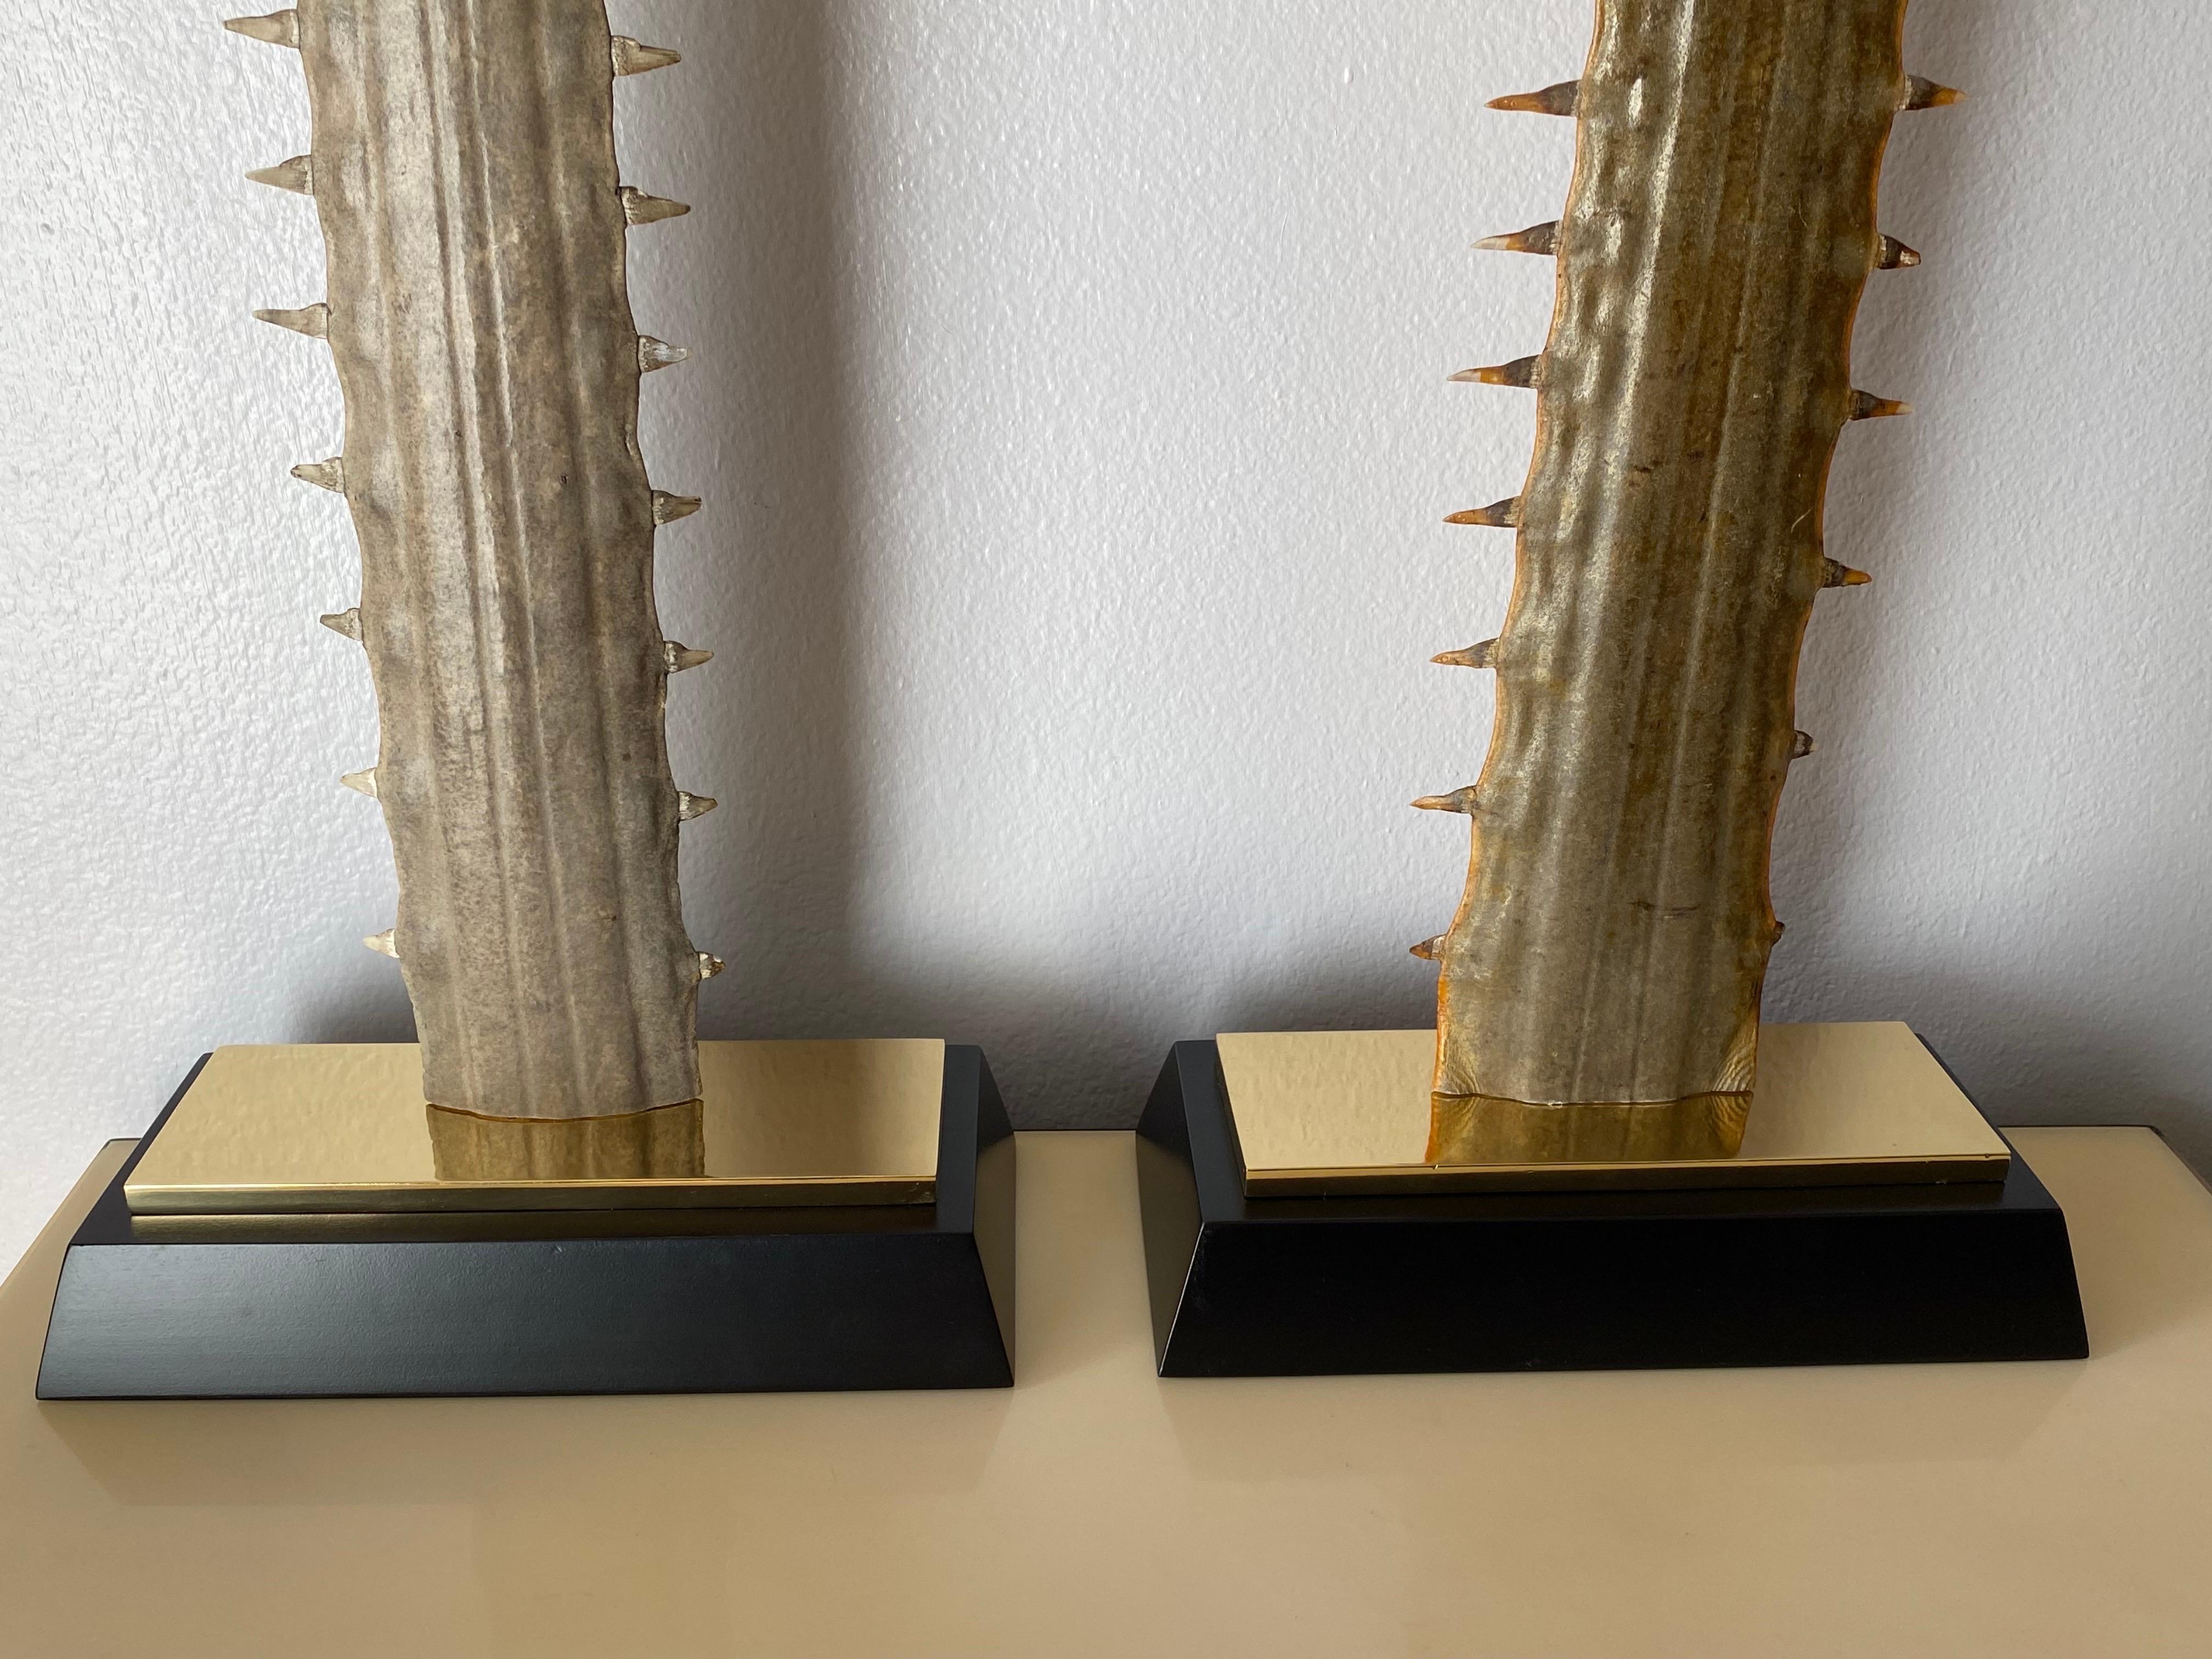 Pair of massive sawfish rostrums / bills mounted on brass and ebonized wood custom bases. These are more than 100 years old and came from a collector who had them in his possession for more than 70 years. No international shipping.
Larger is 43